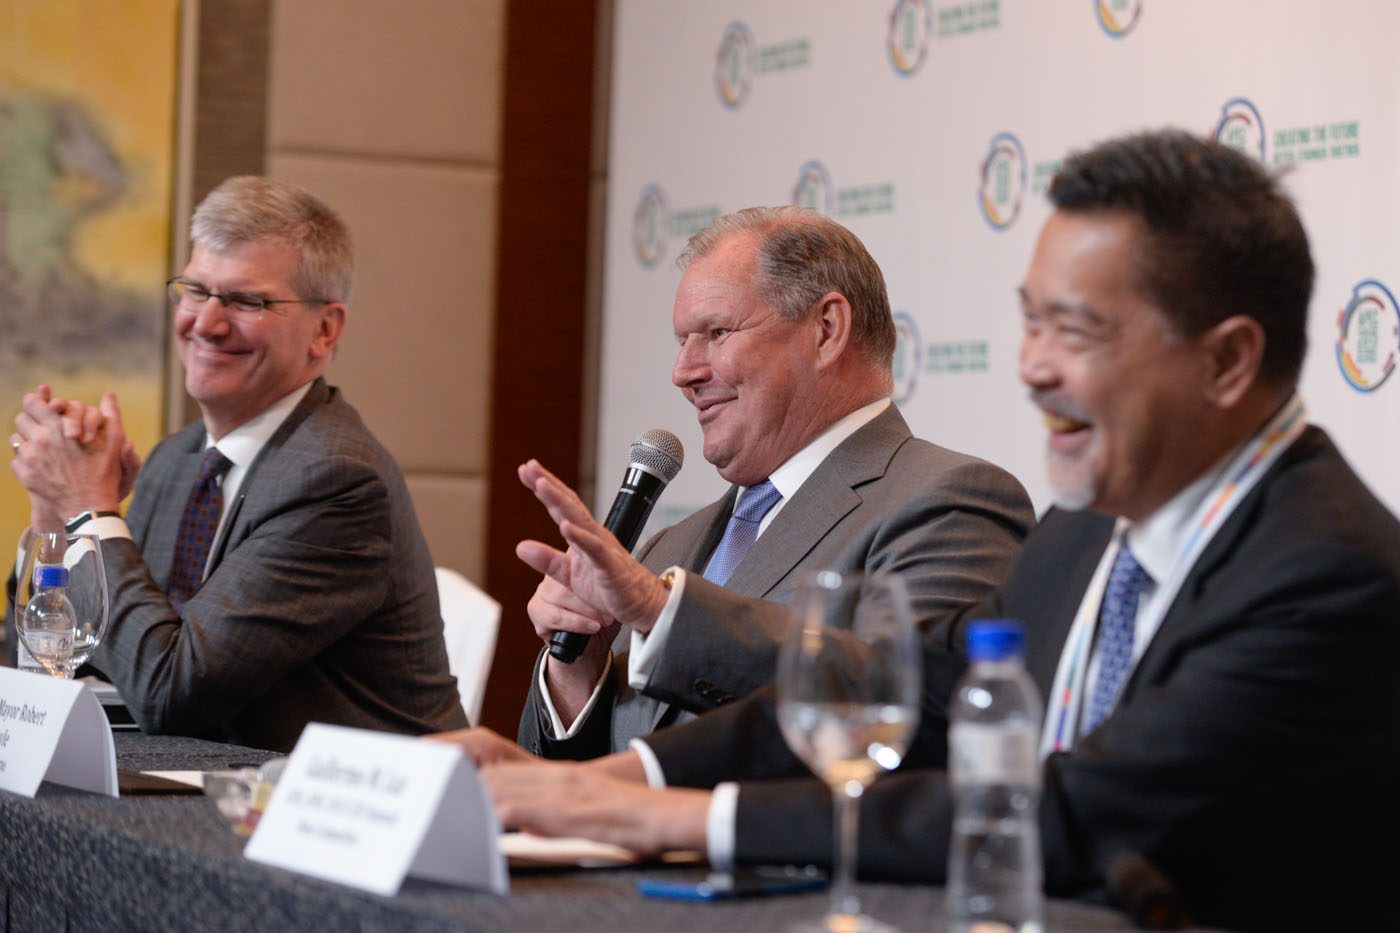 ON LIVABLE CITIES.  (From left) PwC's Robert Gittings, Melbourne's Lord Mayor Robert Doyle, and National Competitive Council's Guillermo Luz share what makes a city livable, citing various economic indicators. Photo by Alecs Ongcal/Rappler   